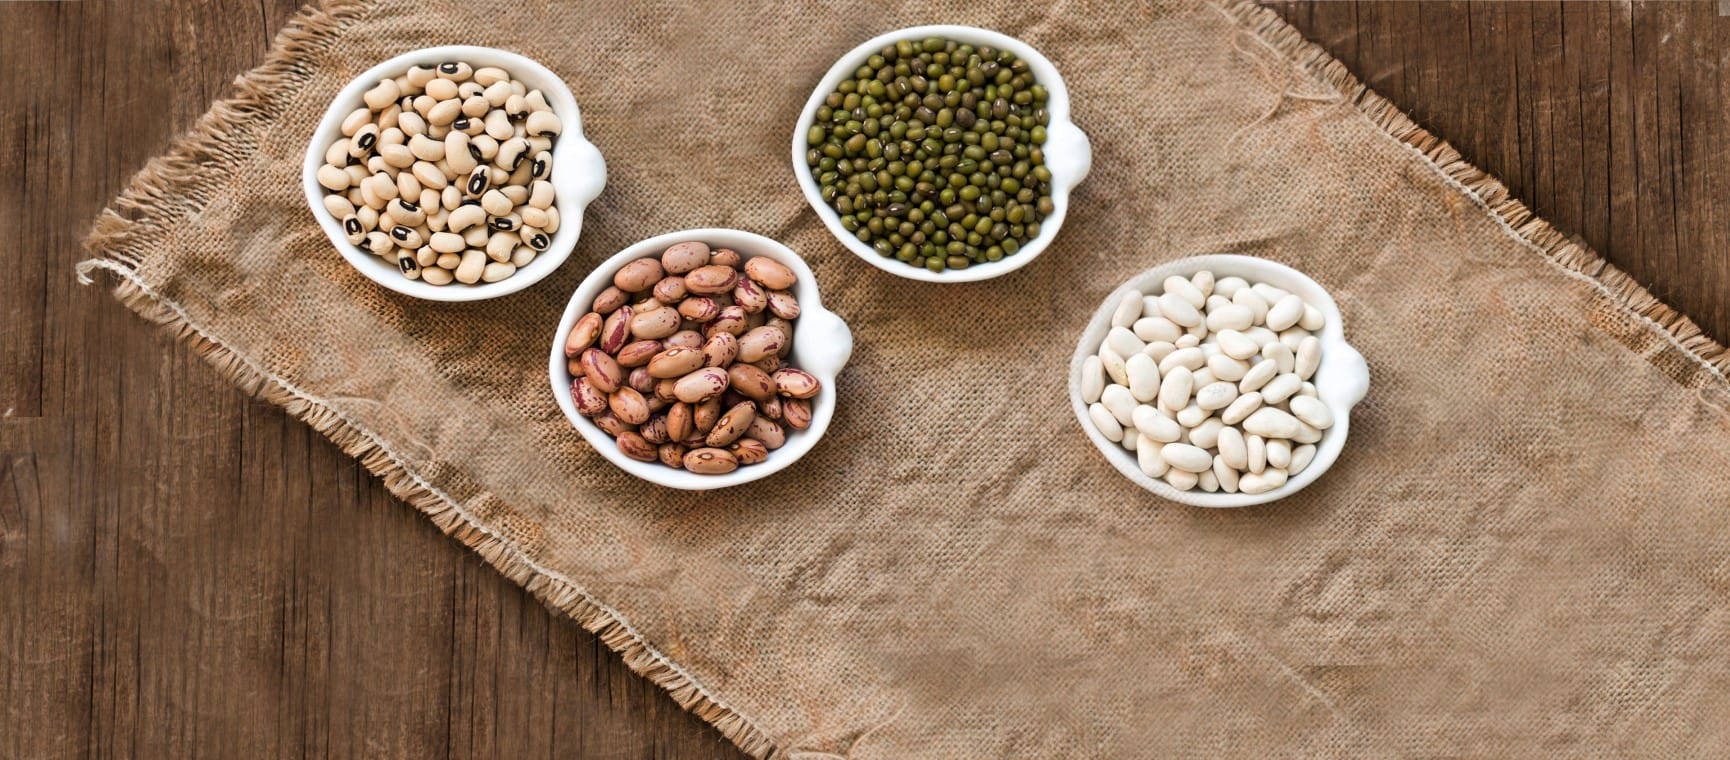 Assortment of legumes in bowls on wooden table | Getty/Karisssa